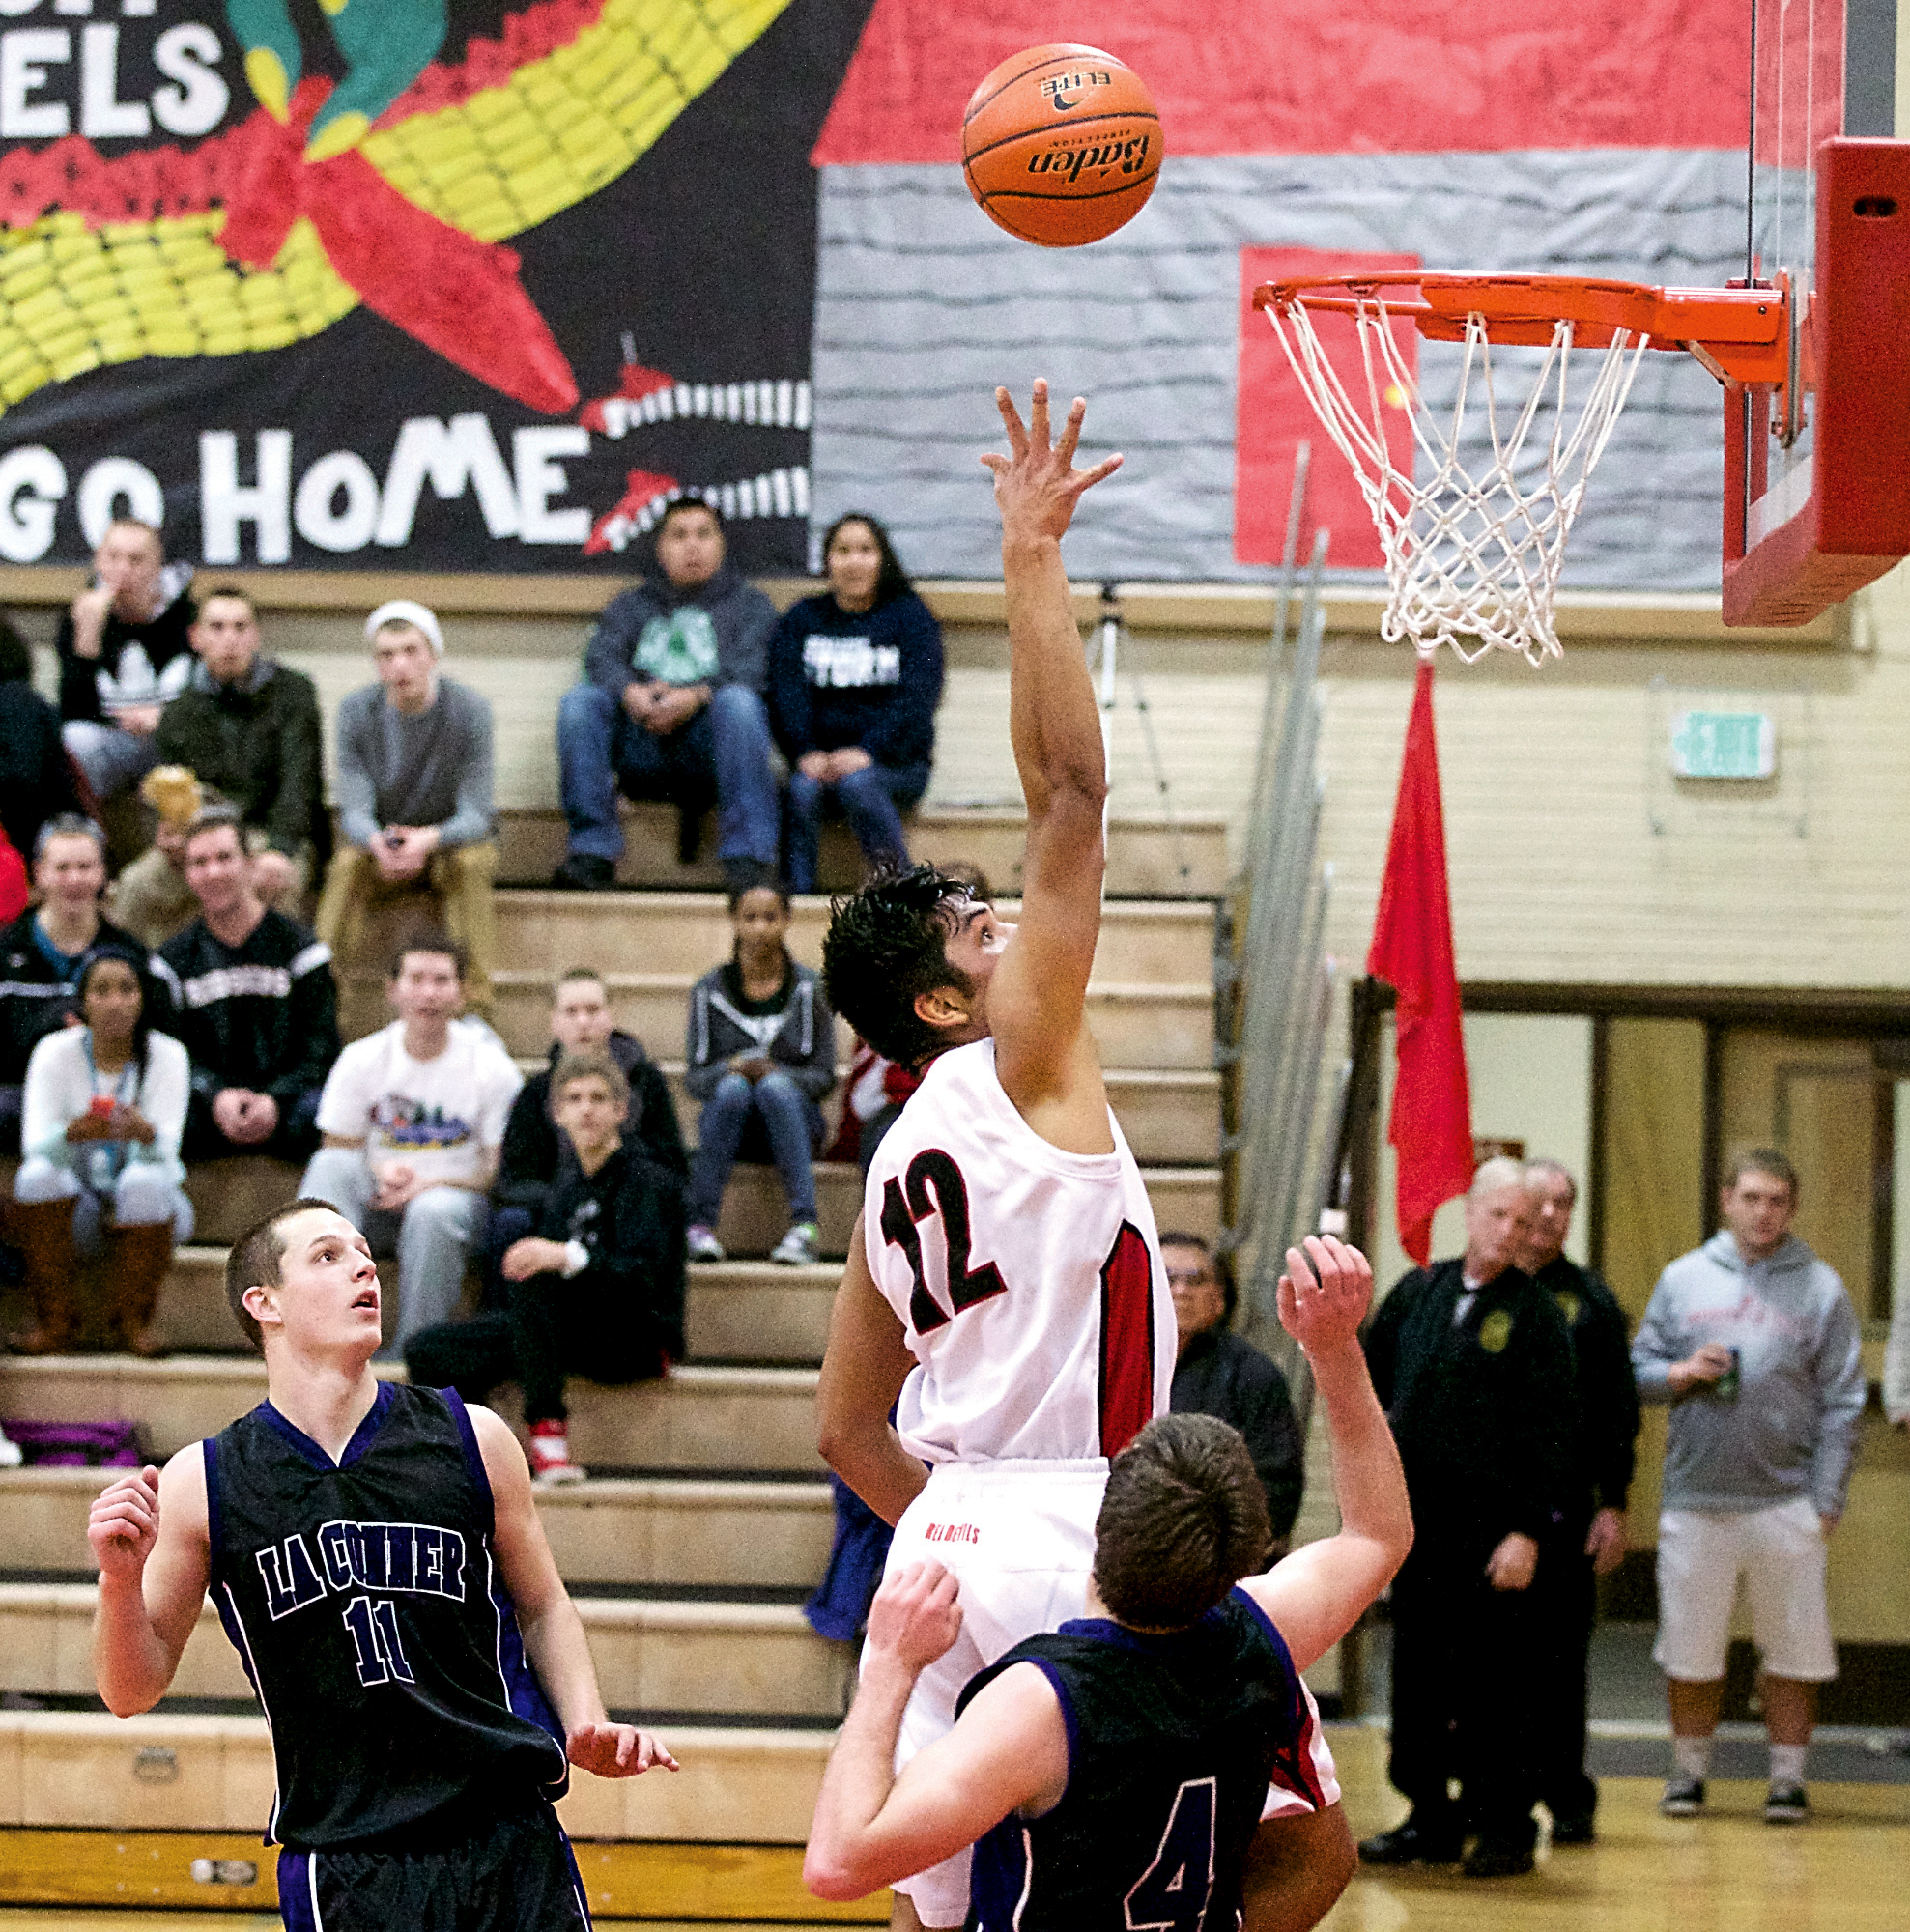 Neah Bay's Josiah Greene (12) makes the game-winning basket against La Conner at the Crush in the Slush tournament at Port Townsend High School. Steve Mullensky/for Peninsula Daily News